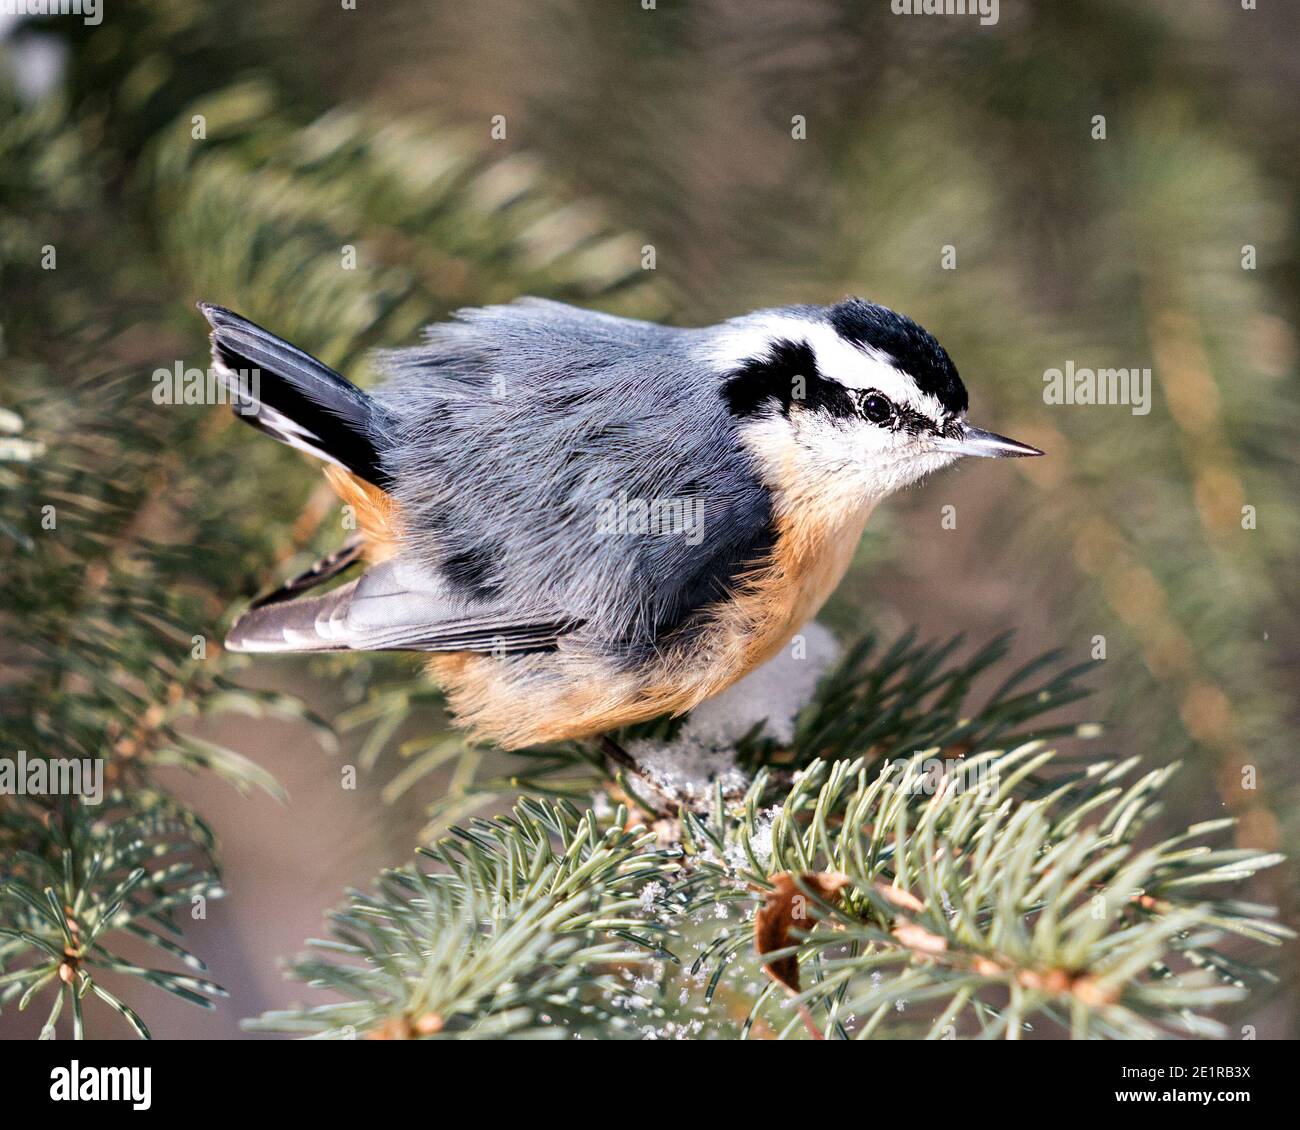 Nuthatch close-up profile view perched on a tree branch in its environment and habitat with a blur background, displaying fluffy feather wings and bir Stock Photo